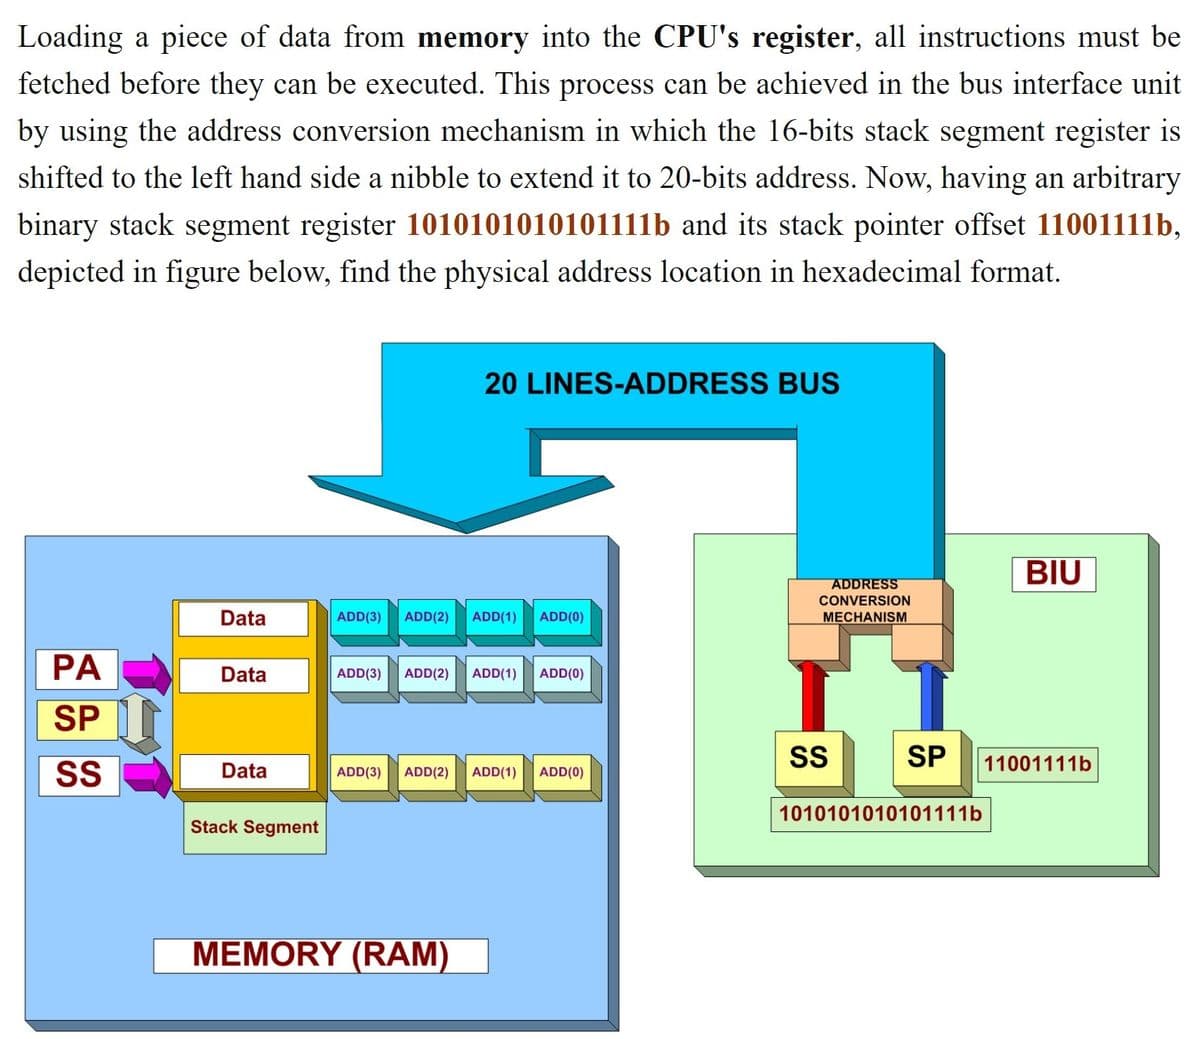 Loading a piece of data from memory into the CPU's register, all instructions must be
fetched before they can be executed. This process can be achieved in the bus interface unit
by using the address conversion mechanism in which the 16-bits stack segment register is
shifted to the left hand side a nibble to extend it to 20-bits address. Now, having an arbitrary
binary stack segment register 101010101010111lb and its stack pointer offset 11001111b,
depicted in figure below, find the physical address location in hexadecimal format.
20 LINES-ADDRESS BUS
BIU
ADDRESS
CONVERSION
Data
ADD(3)
ADD(2)
ADD(1)
ADD(0)
MECHANISM
Data
ADD(3)
ADD(2)
ADD(1)
ADD(0)
SP
S
SP
11001111b
SS
Data
ADD(3)
ADD(2)
ADD(1)
ADD(0)
1010101010101111b
Stack Segment
MEMORY (RAM)
PSS
